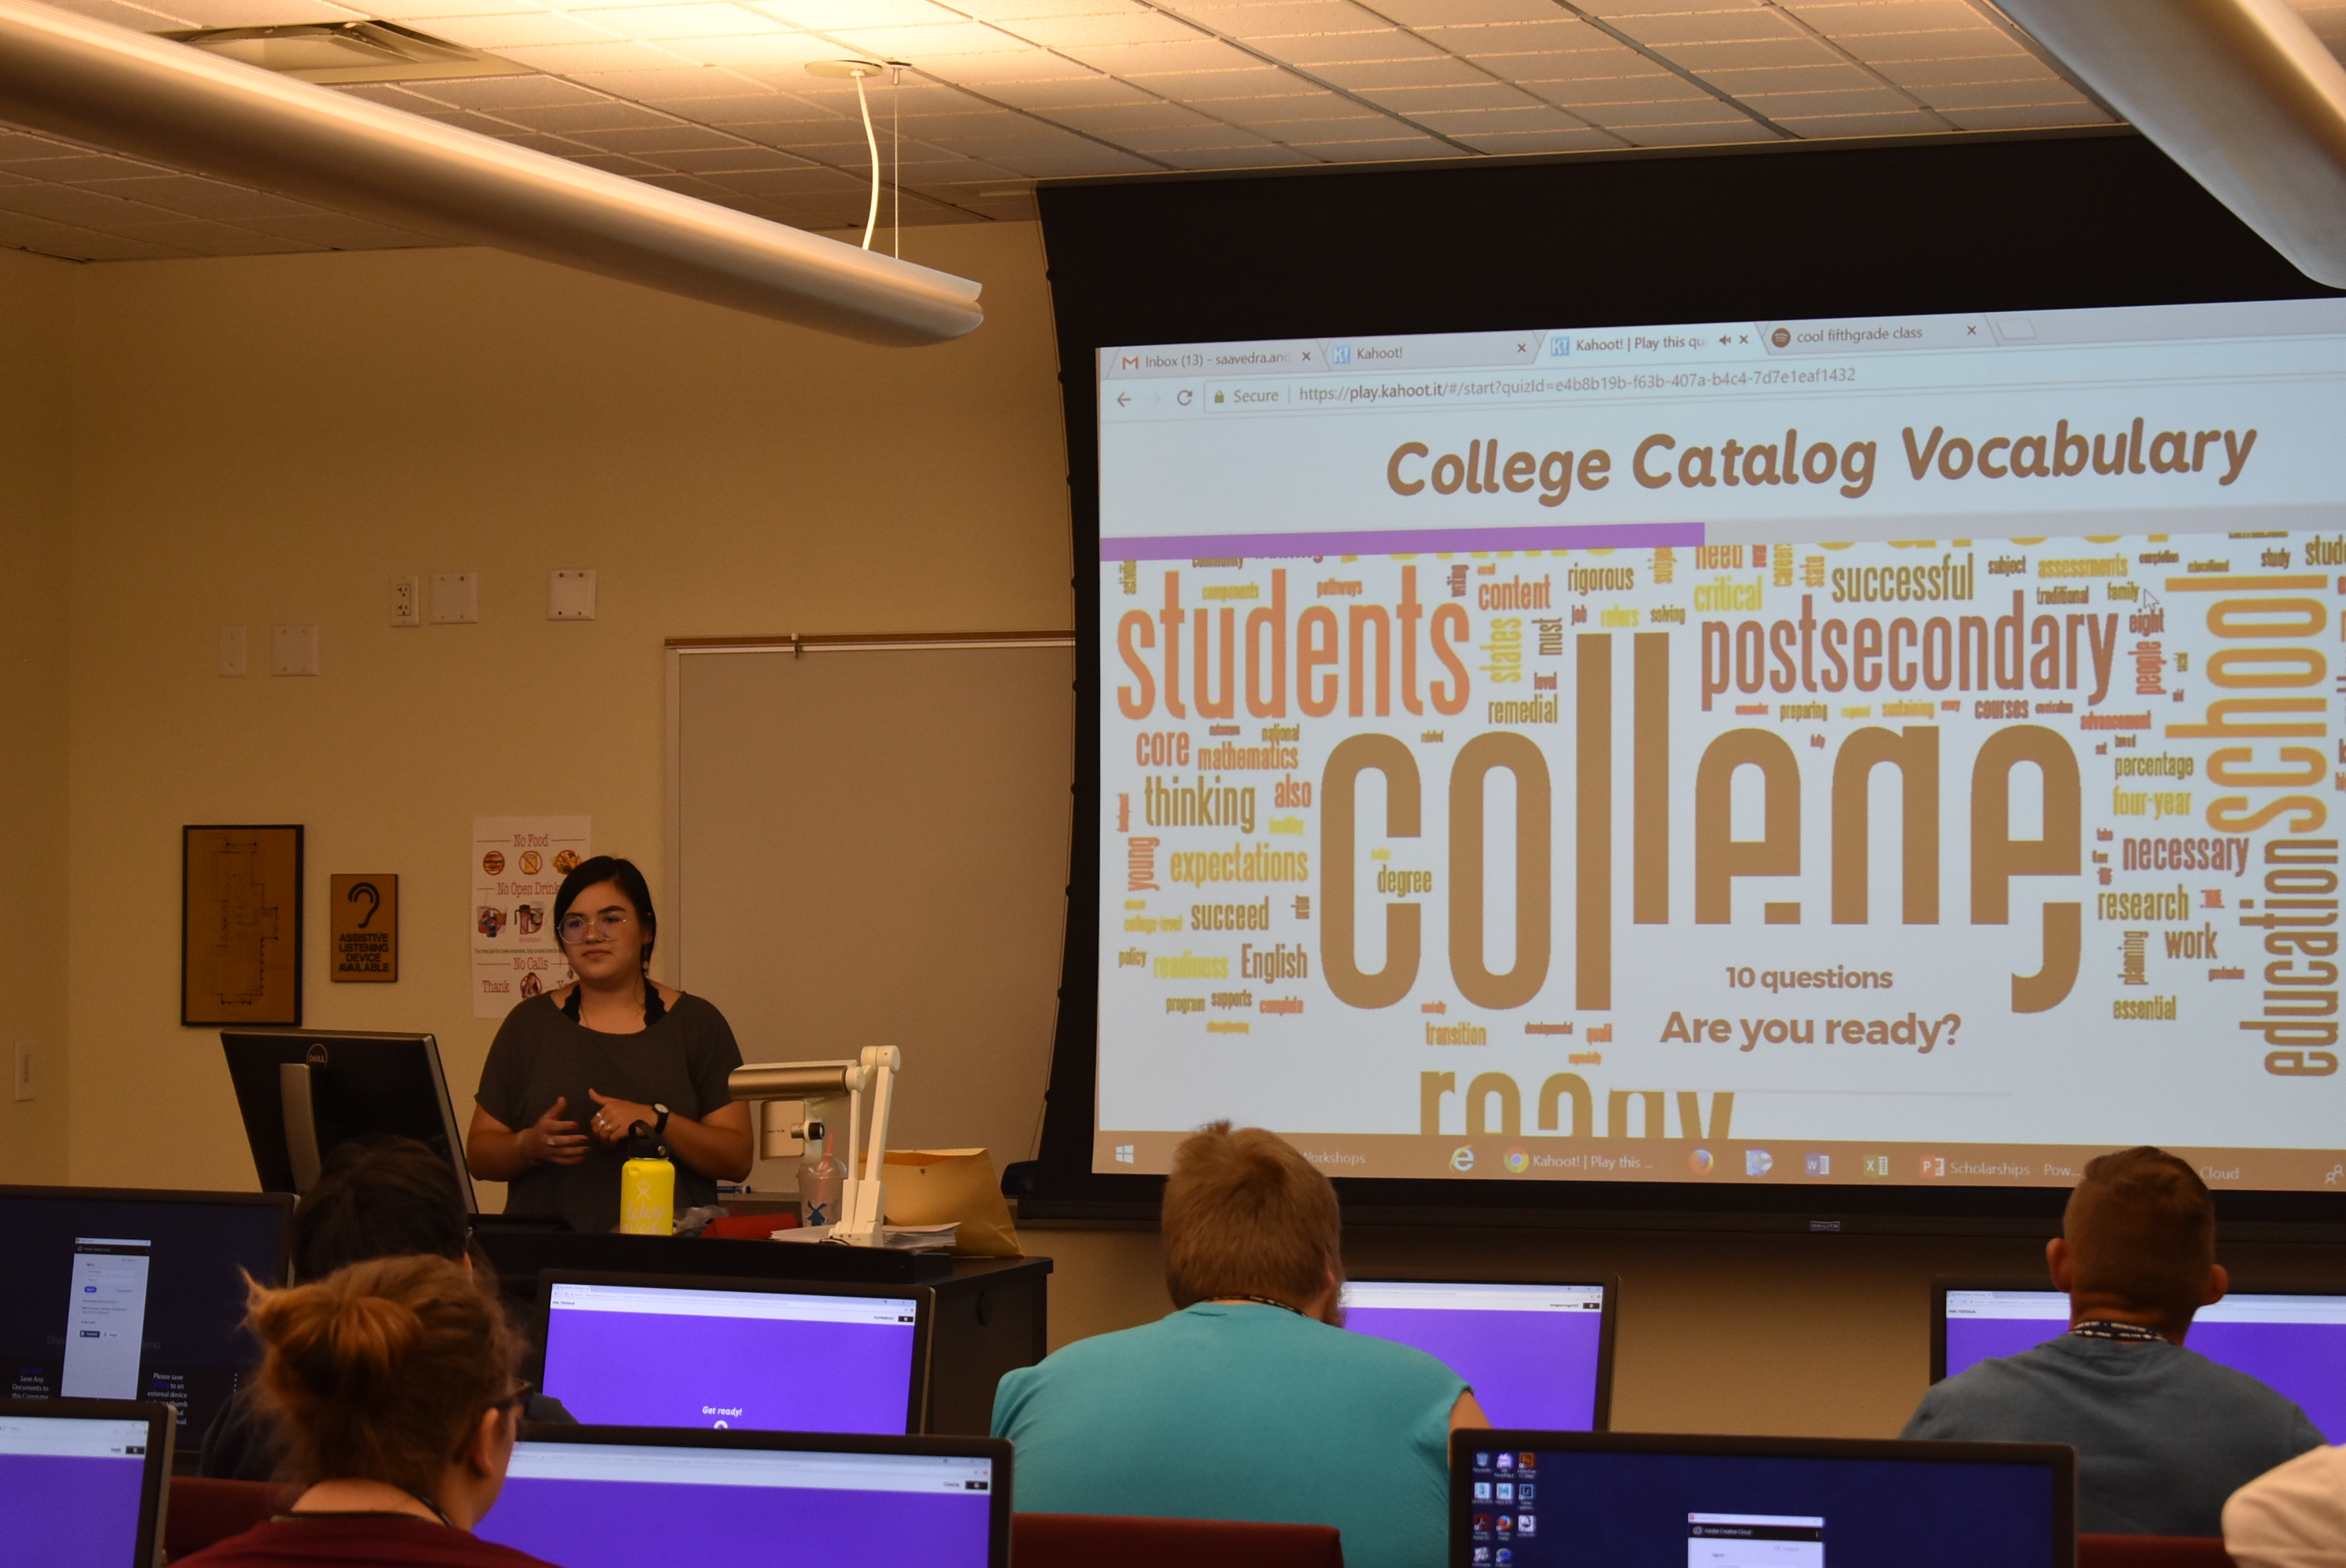 Students attend a presentation about College Vocabulary